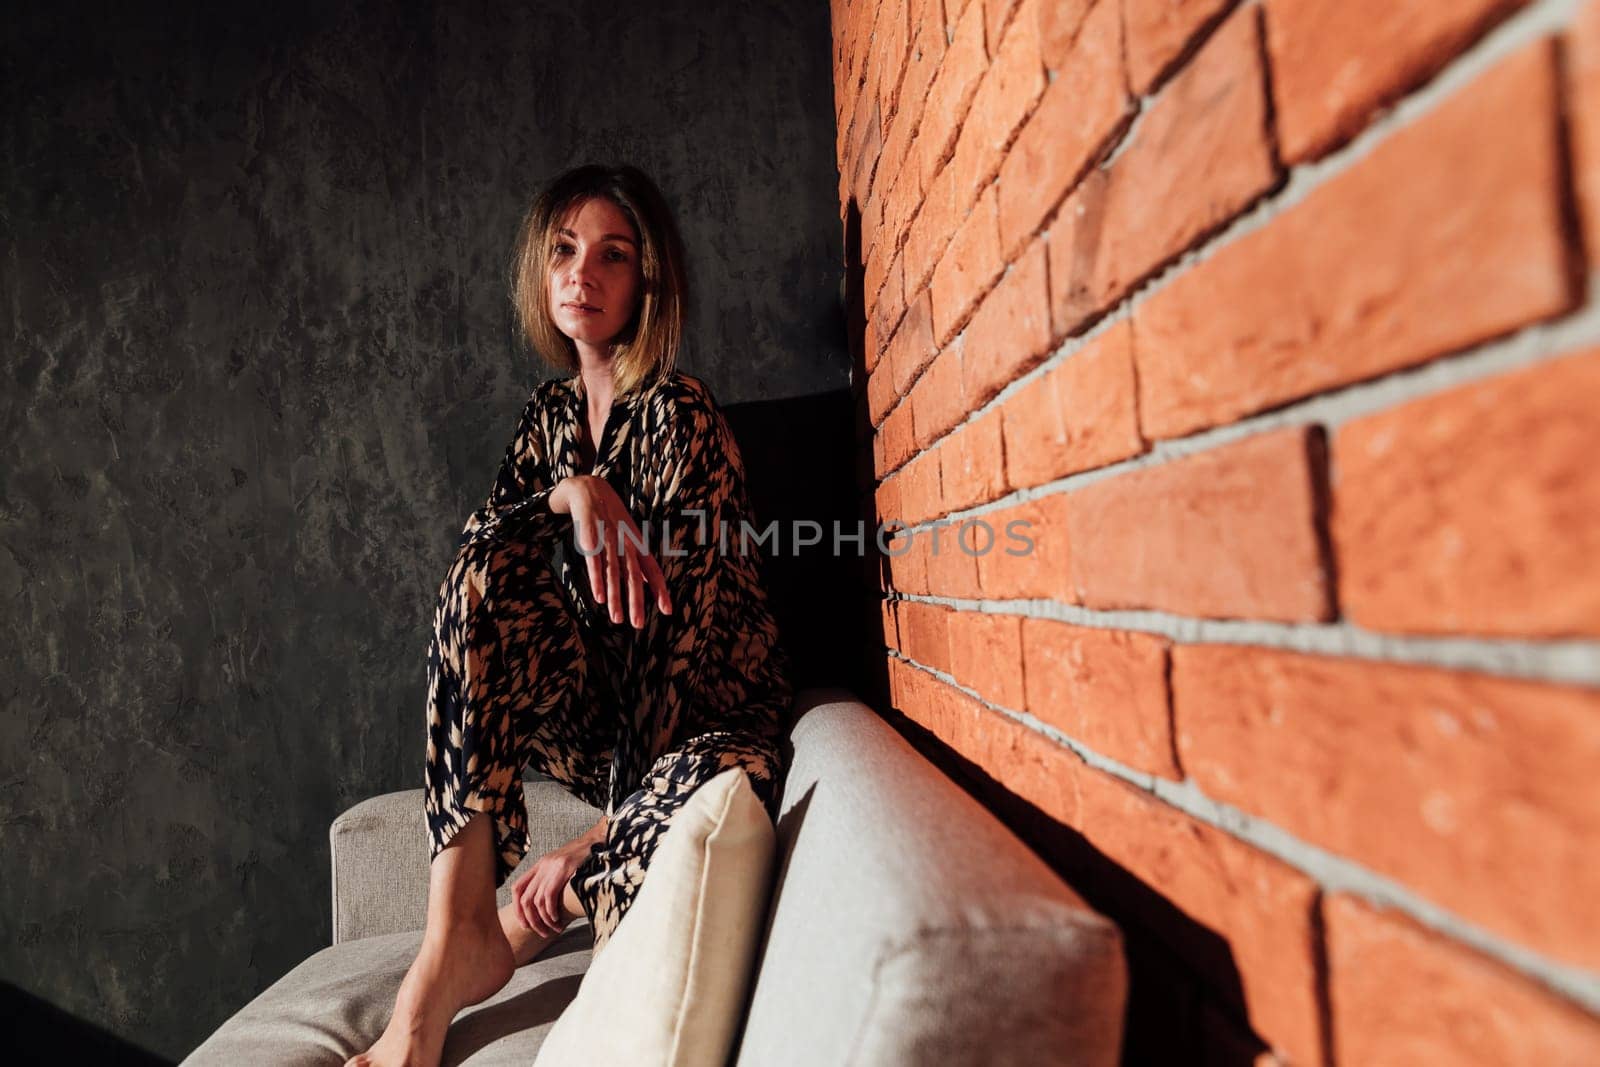 a blonde woman sitting on a couch in a room against a red brick wall by Simakov